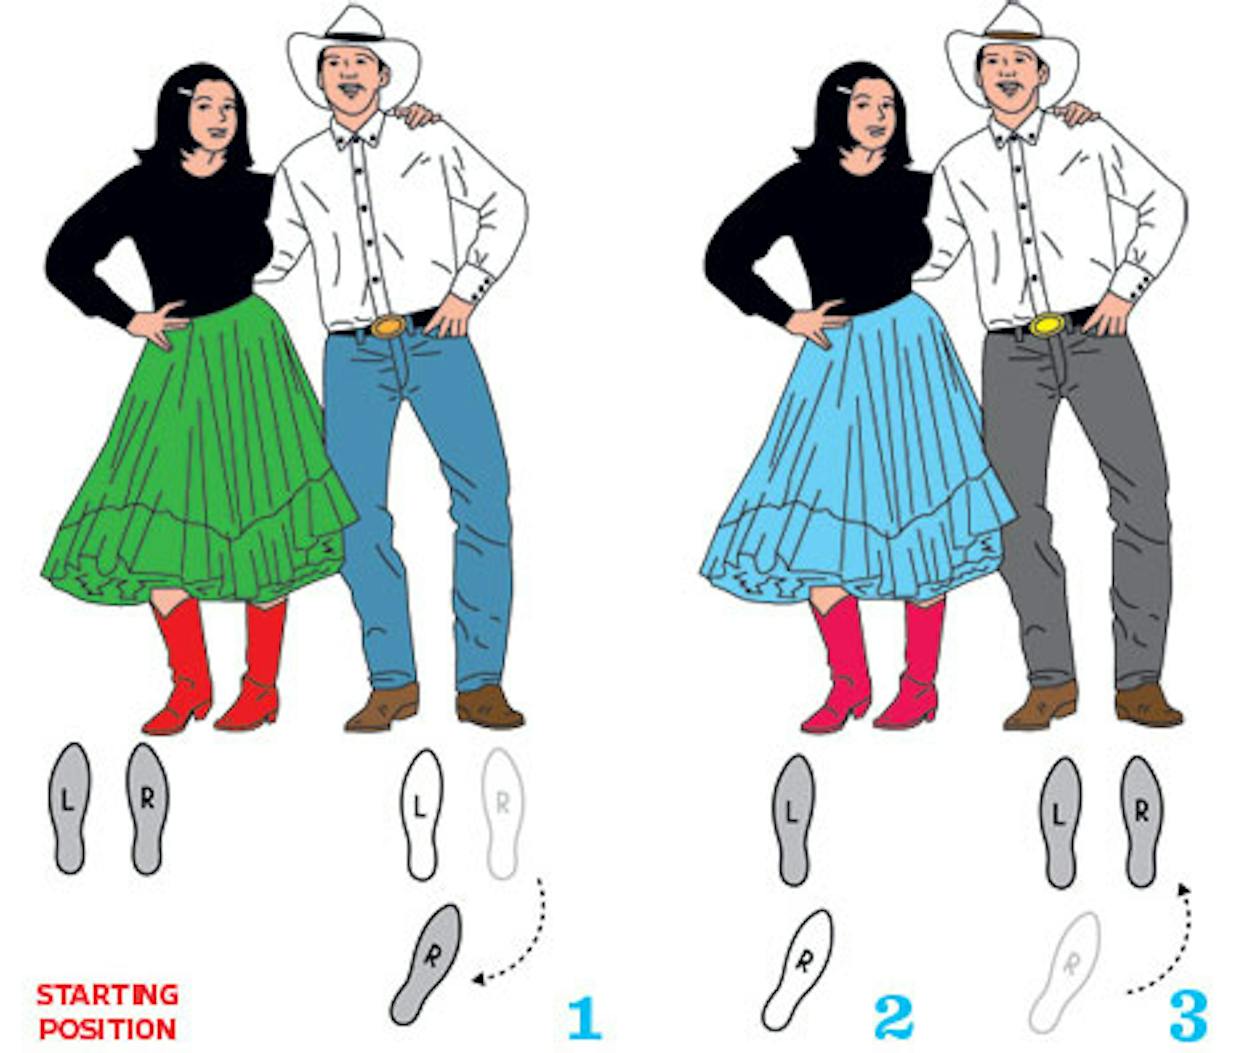 How to dance Cumbia.